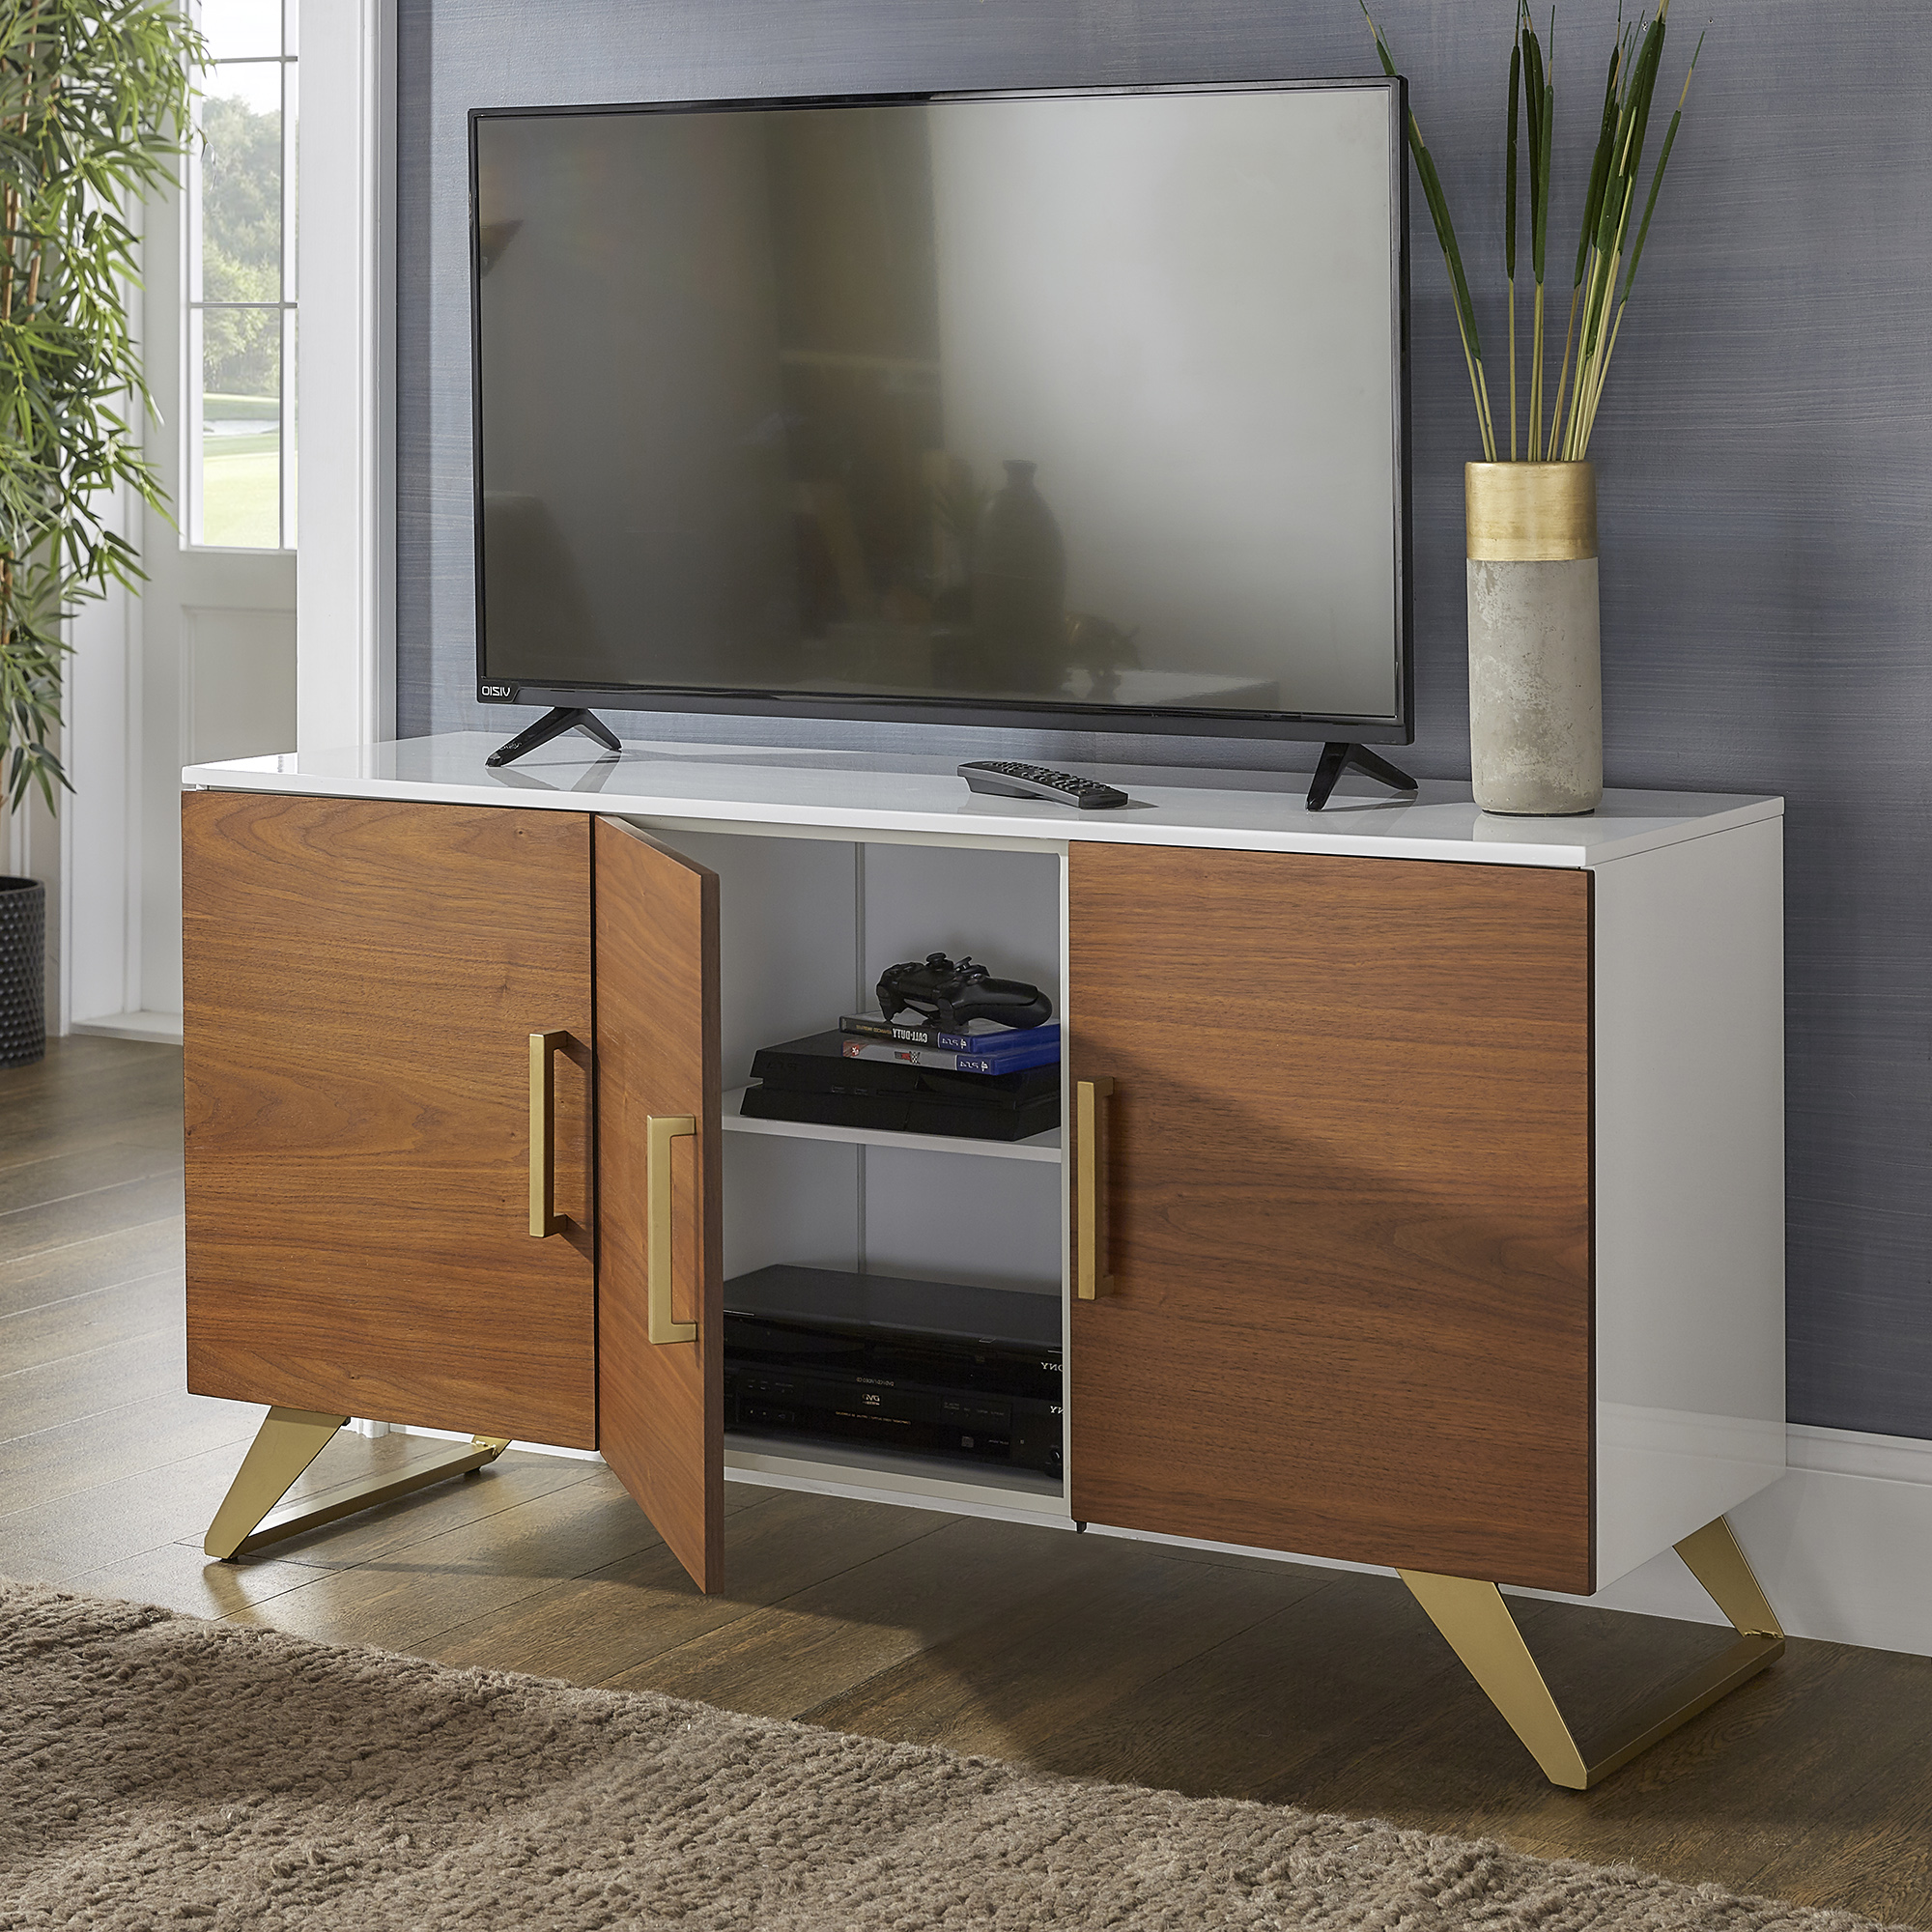 Two-Tone High Gloss White and Walnut Finish 3-Door TV Stand